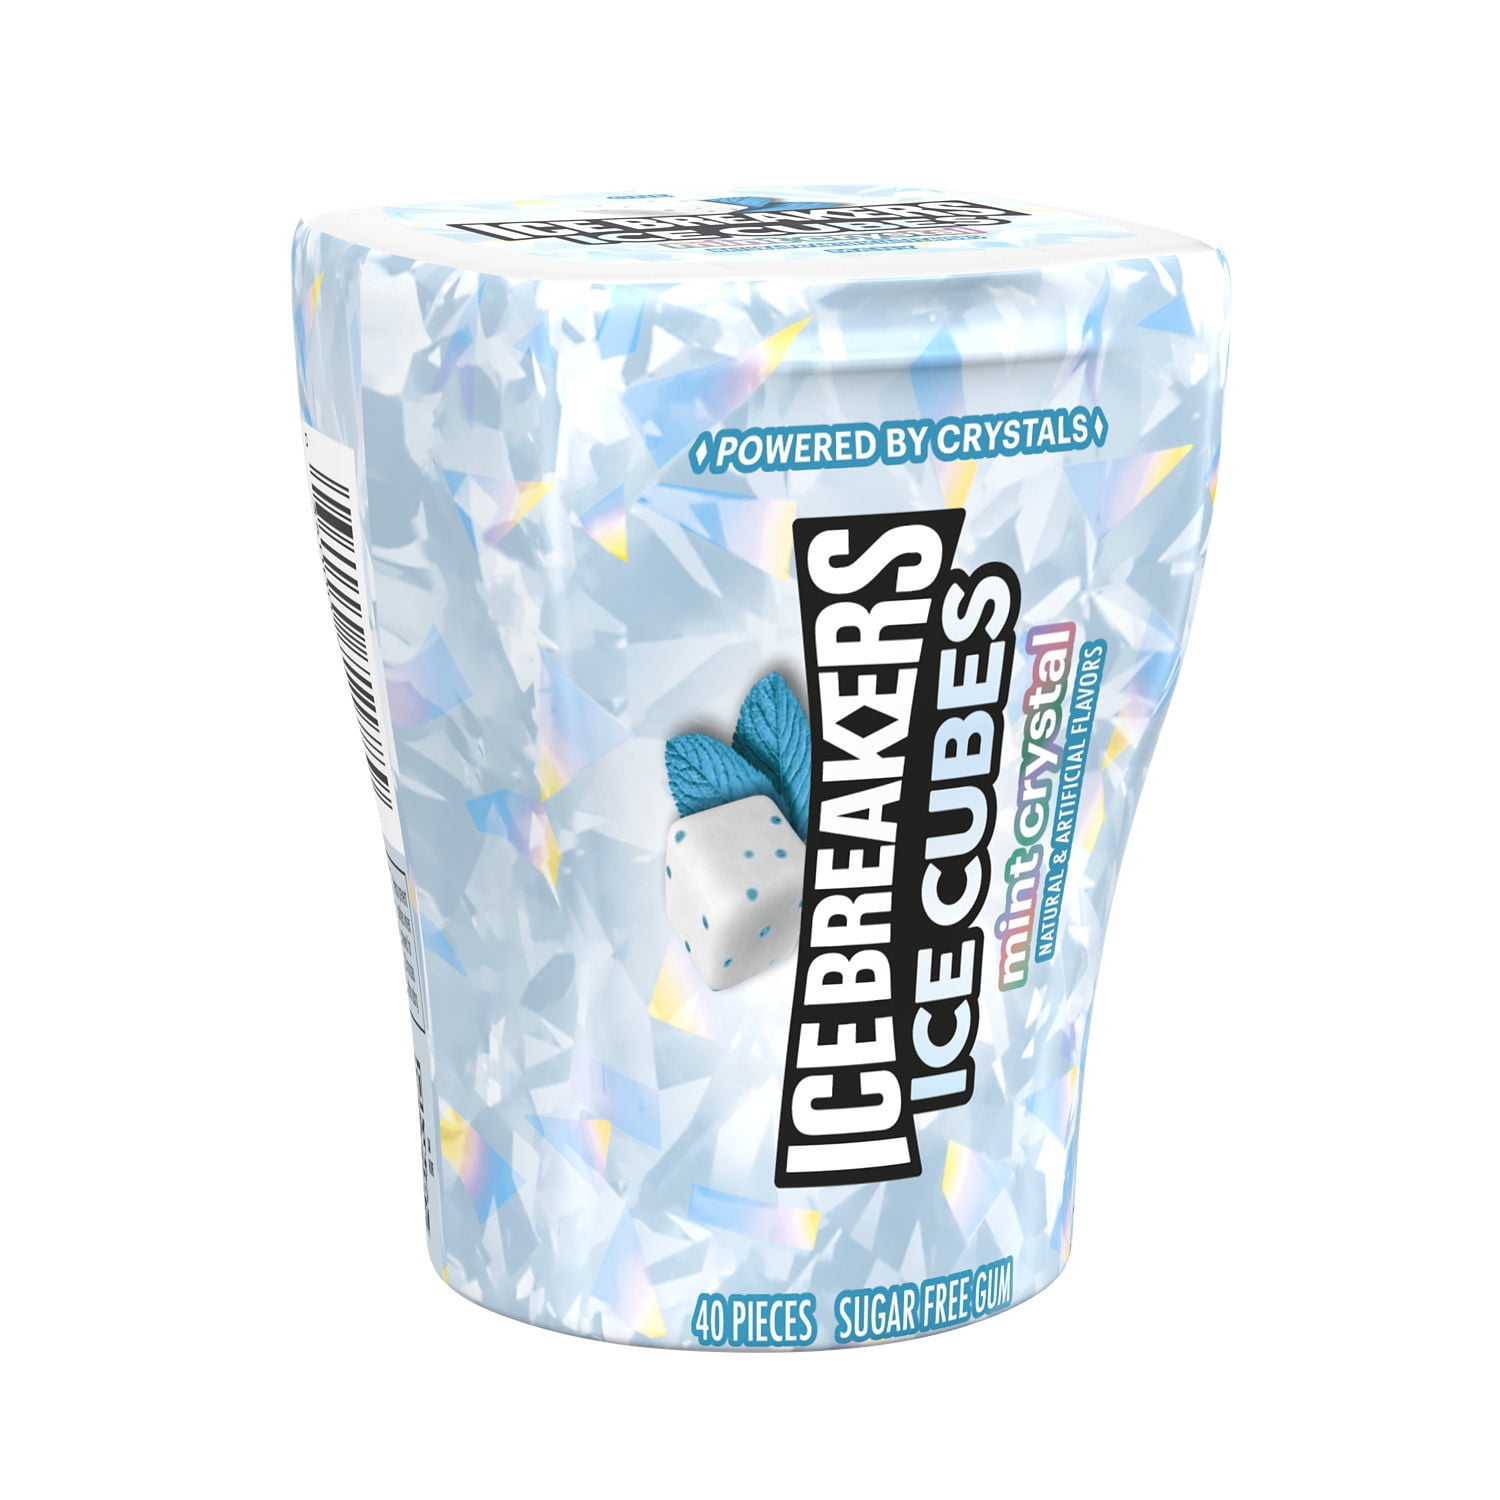 Ice Breakers Ice Cubes Watermelon Slushie Flavored Sugar Free Chewing Gum Bottle - 3.24 oz